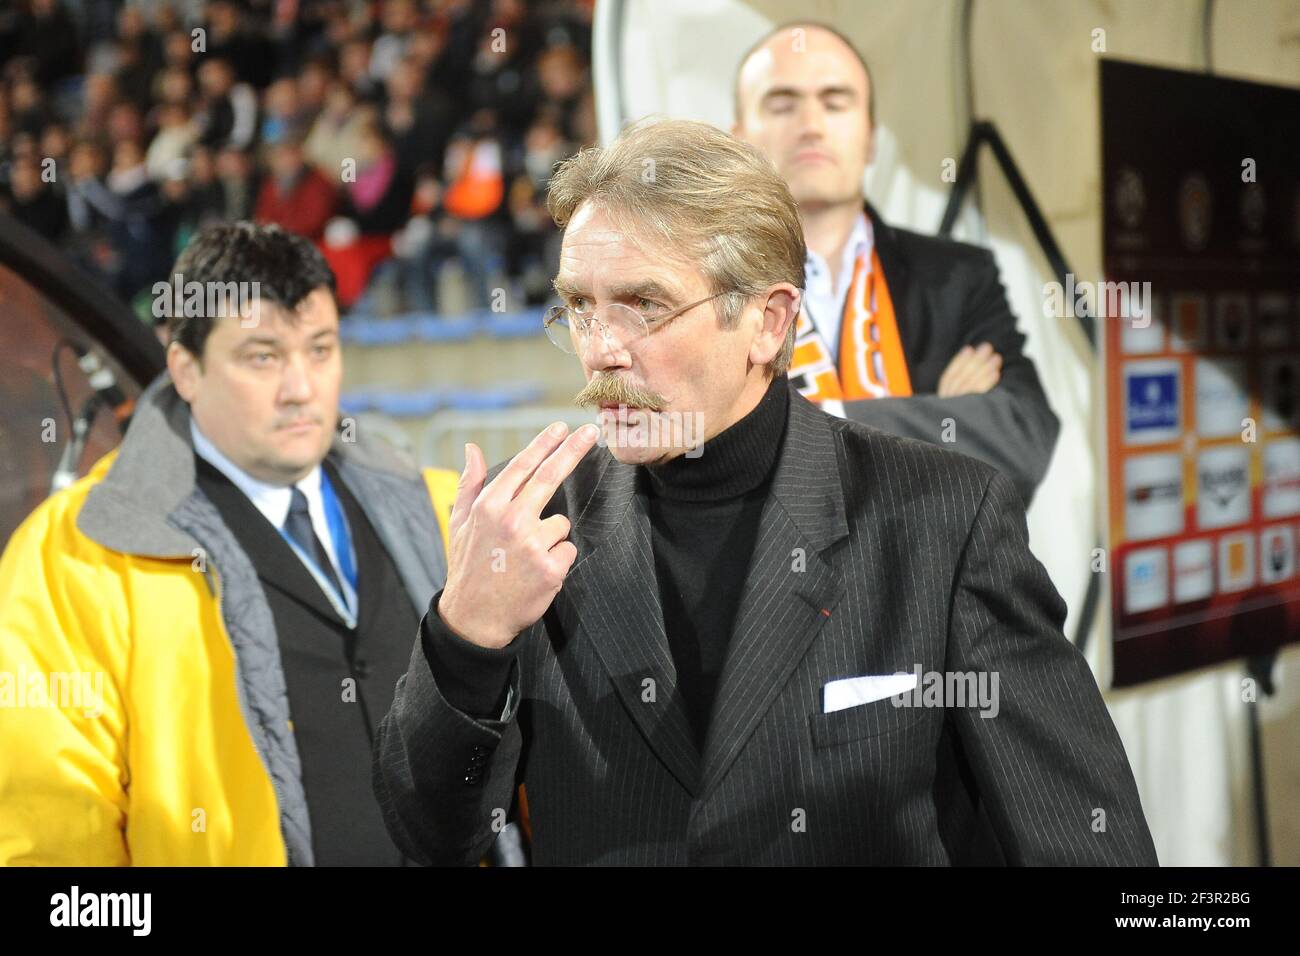 FOOTBALL - FRENCH CHAMPIONSHIP 2009/2010 - L1 - FC LORIENT v OLYMPIQUE LYONNAIS - 20/01/2010 - PHOTO PASCAL ALLEE / DPPI - FREDERIC THIRIEZ (LFP PRESIDENT) Stock Photo